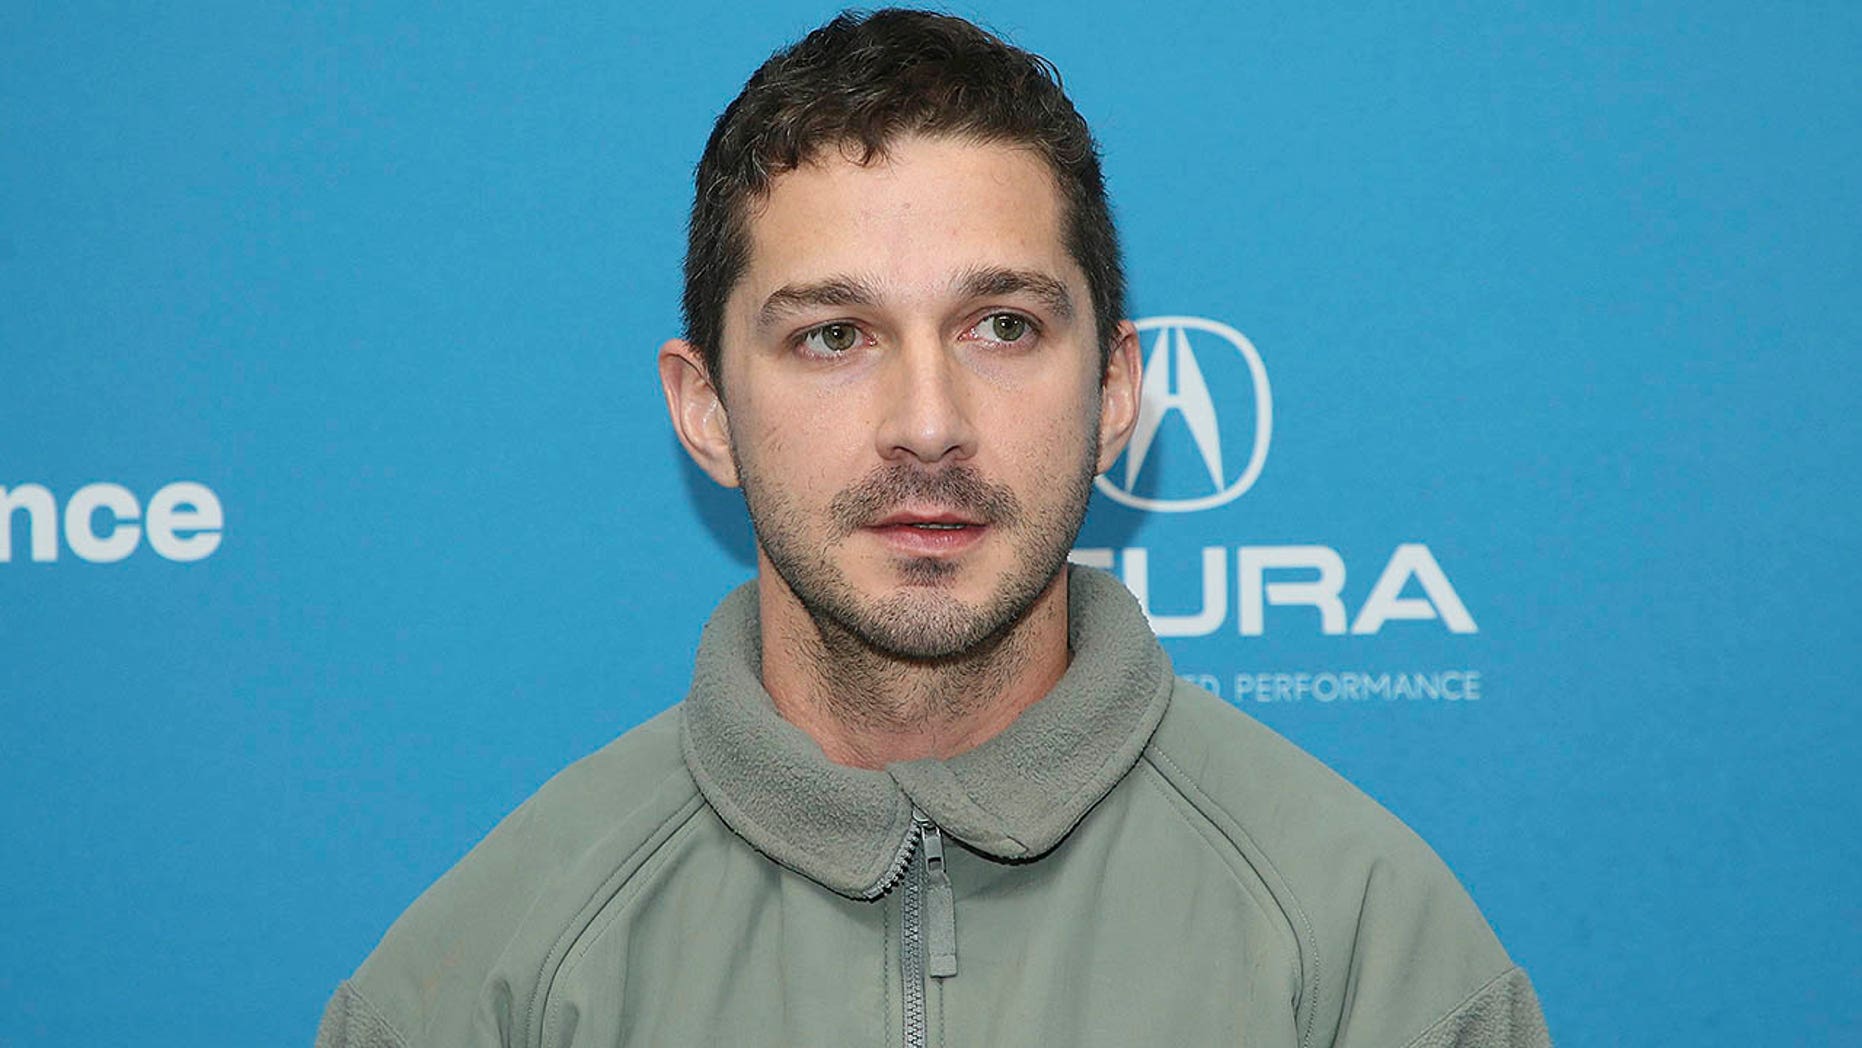 Shia LaBeouf wrote autobiographical film 'Honey Boy' while in court-ordered rehab ...1862 x 1048